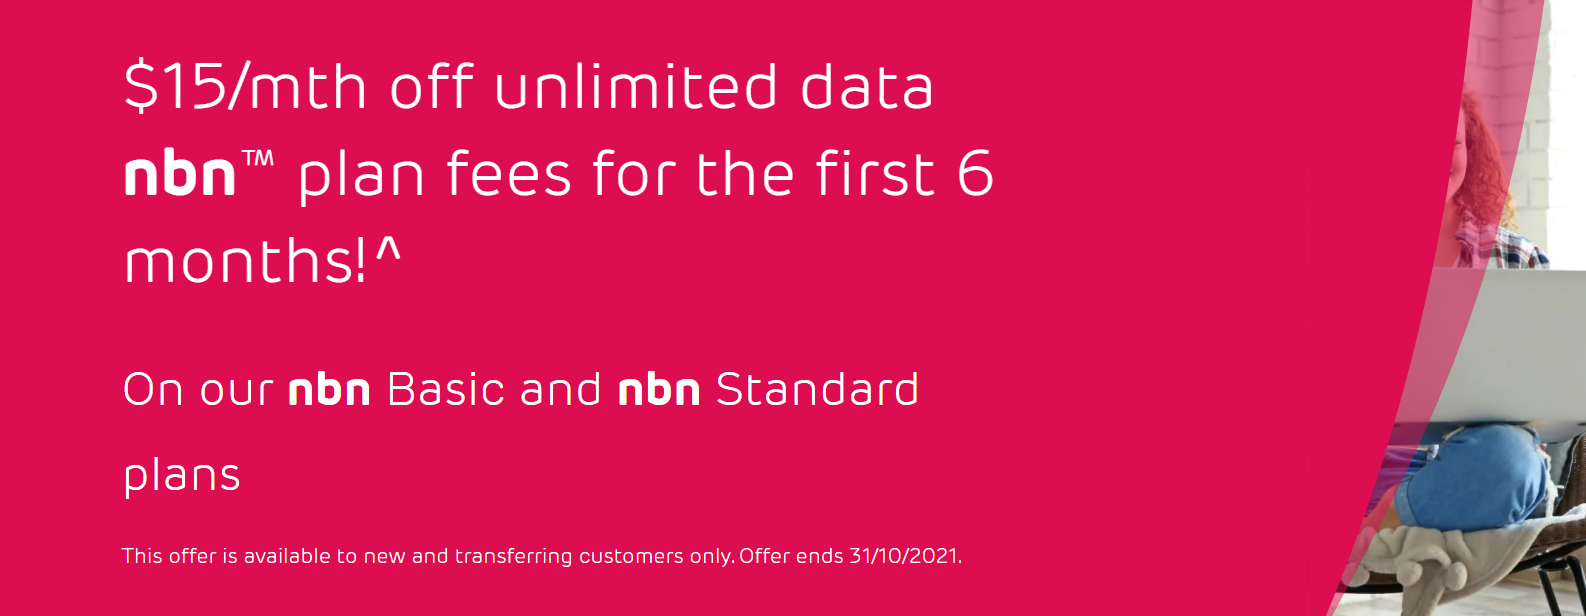 Get $15/mth off unlimited data nbn plan fees for the first 6 months